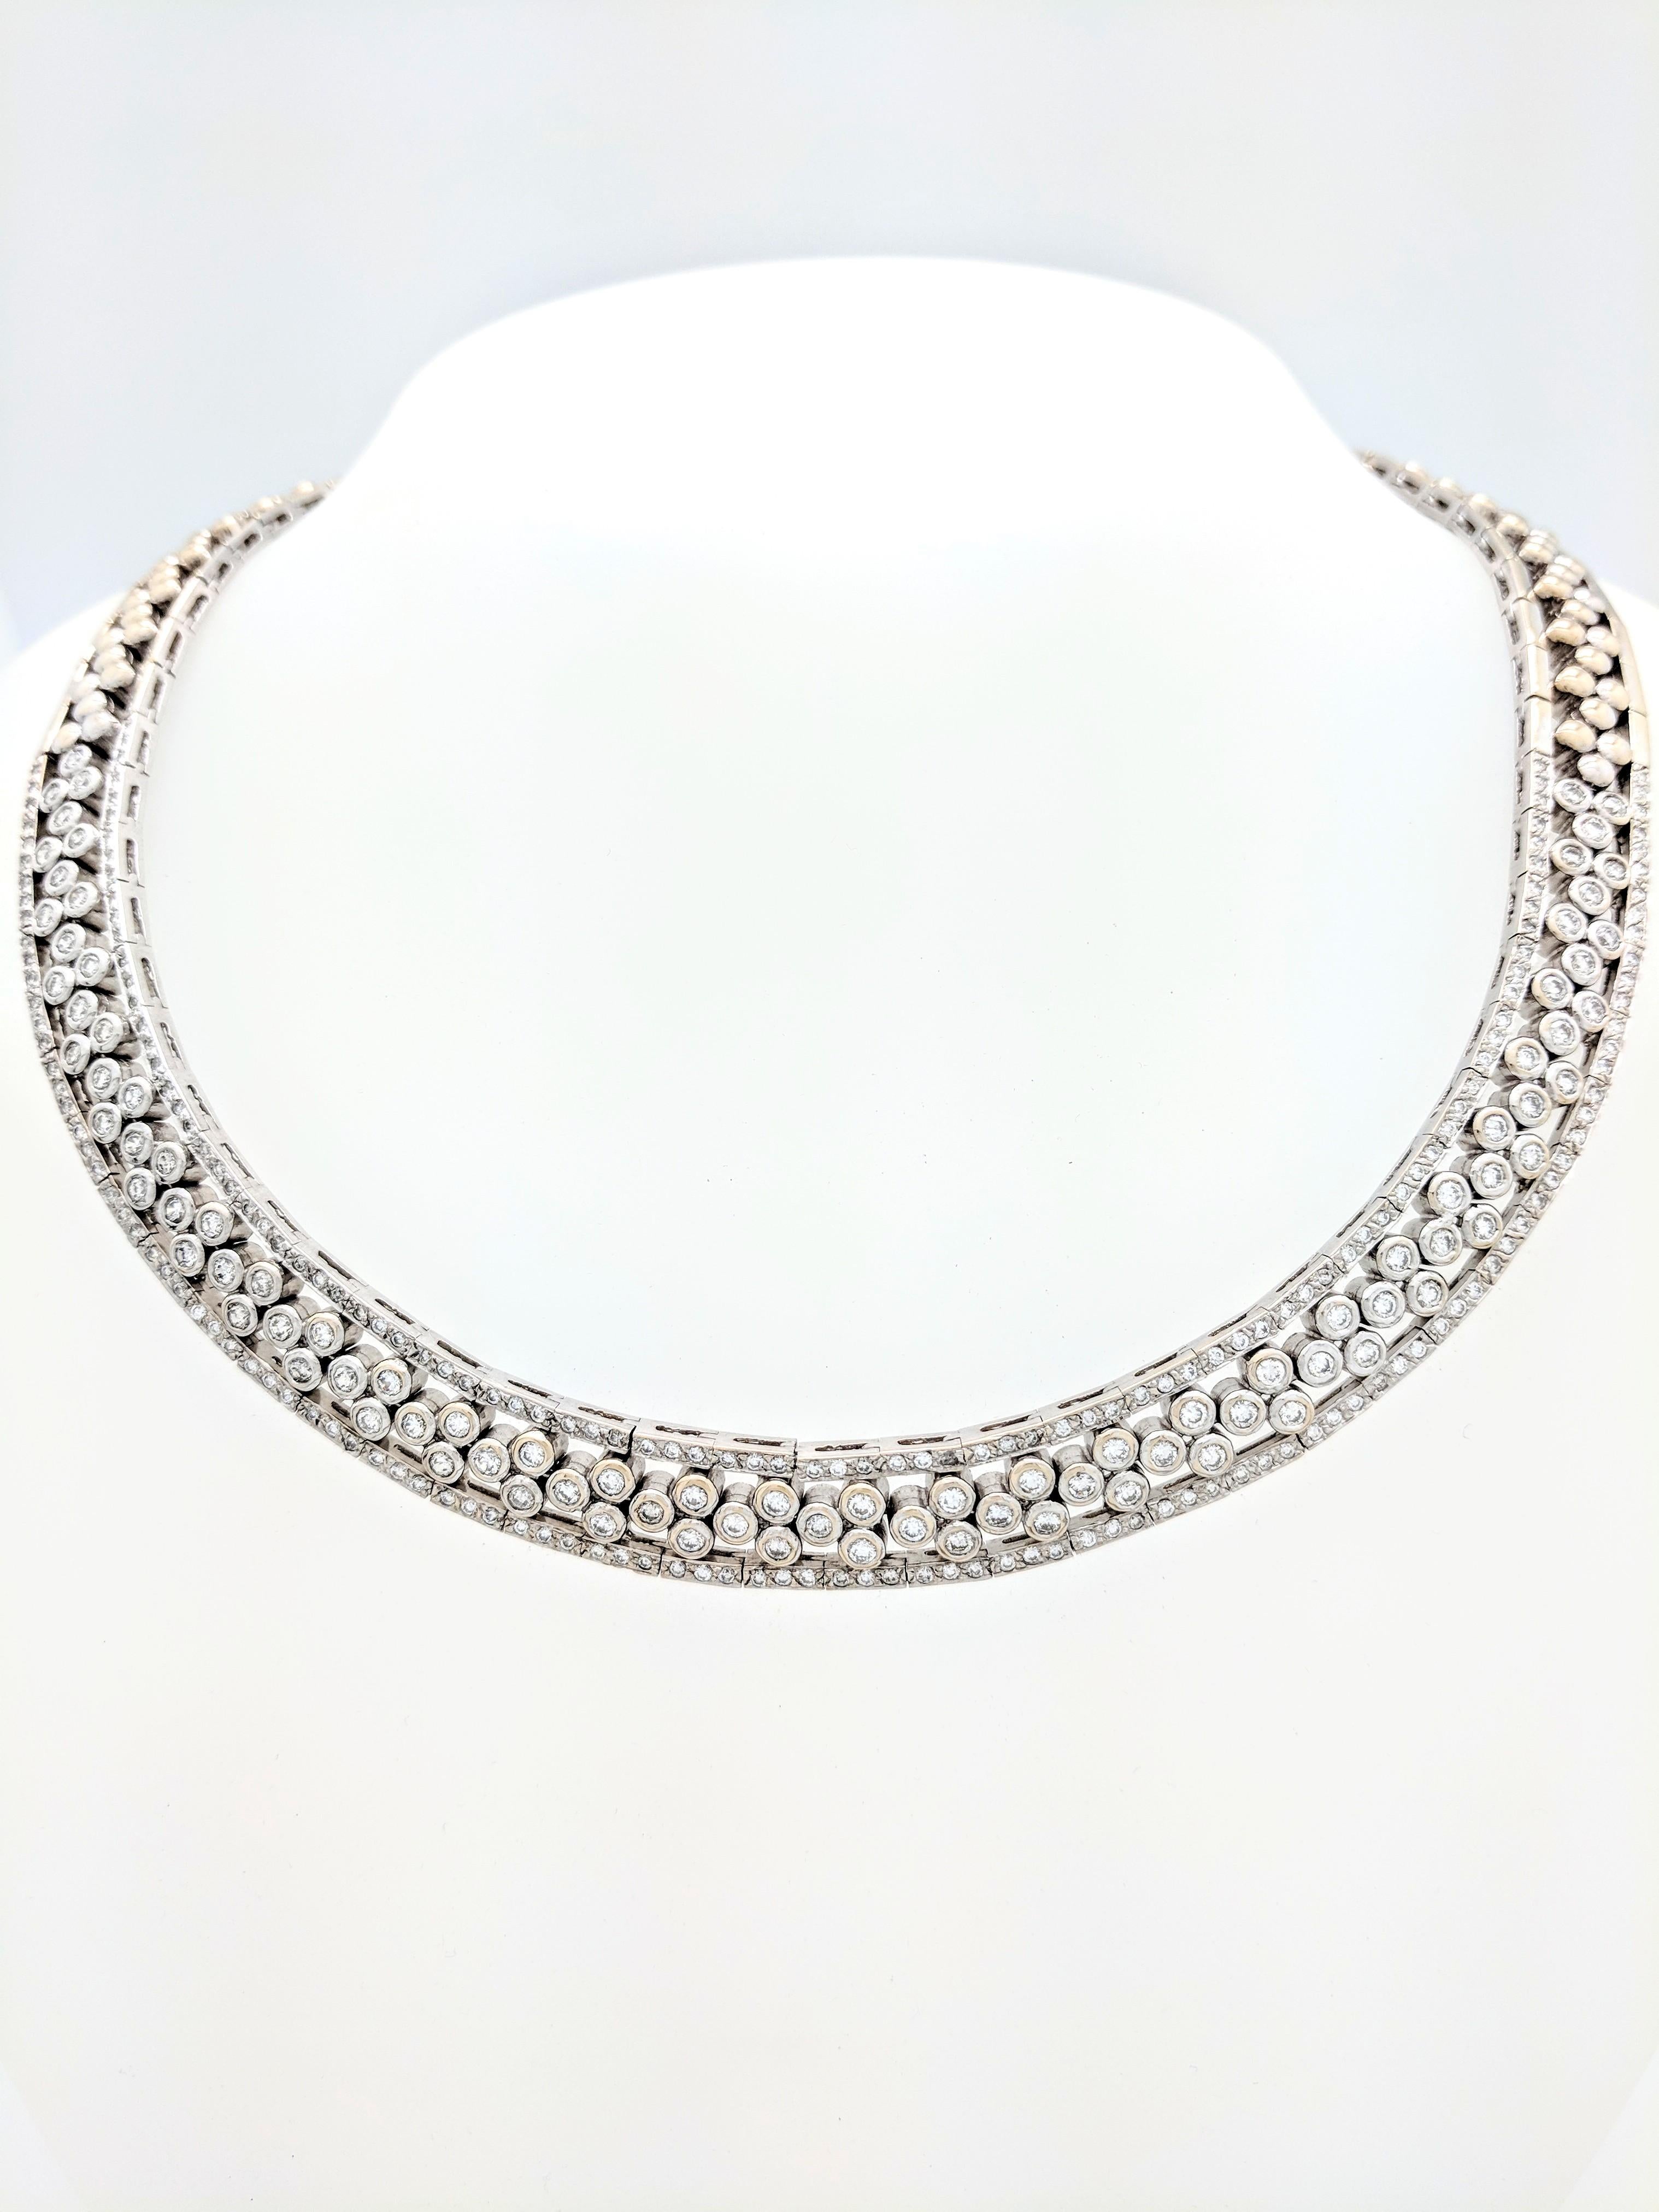 You are viewing a beautiful bezel & pave set diamond choker necklace.

This necklace is crafted from 18k white gold and weighs 104 grams. It features 93 .05ct.  natural round brilliant cut bezel set diamonds and 198 .01ct. natural round brilliant